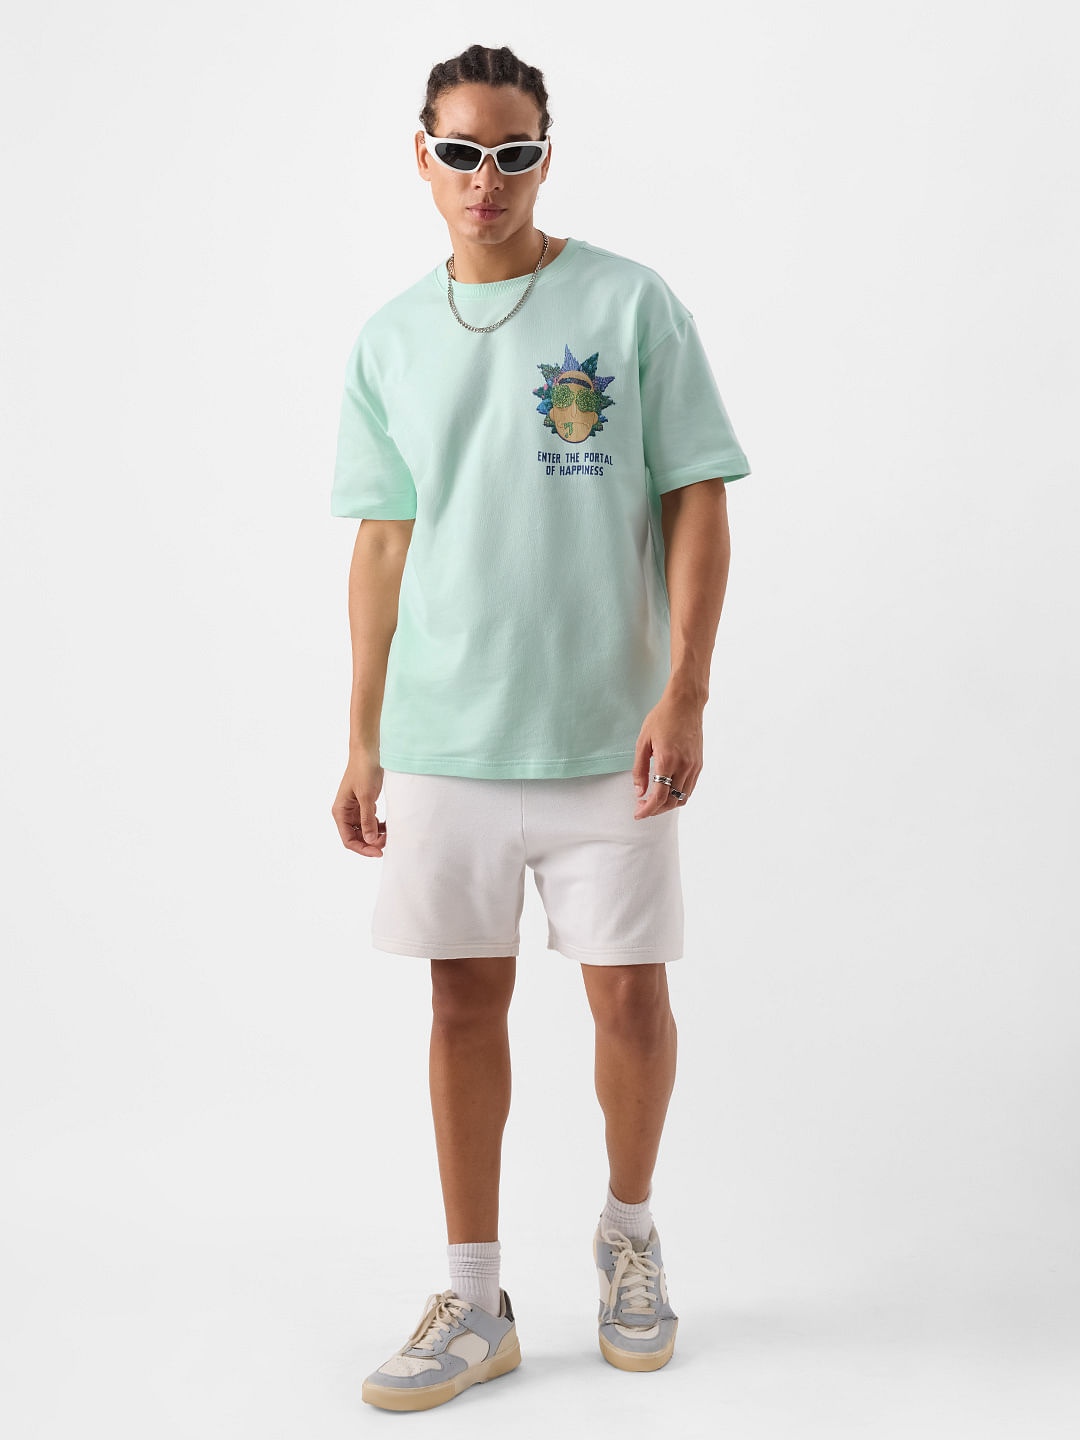 Buy Ricky and Morty: Portal to Happiness Men Oversized Tshirt Online.